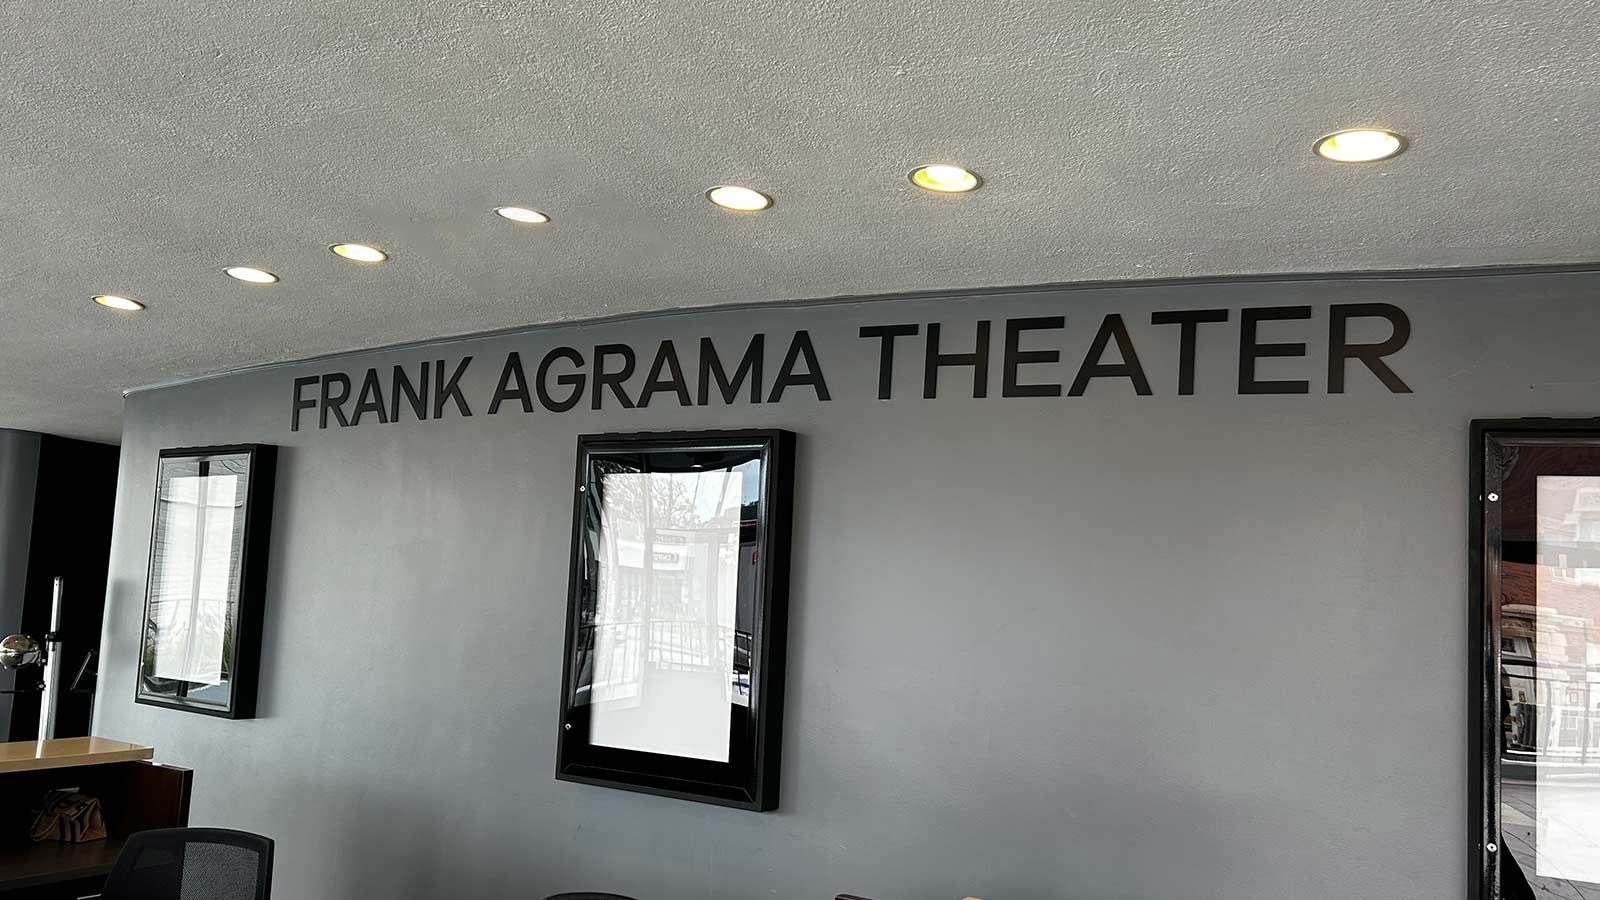 Frank Agrama Theater interior sign attached to the wall